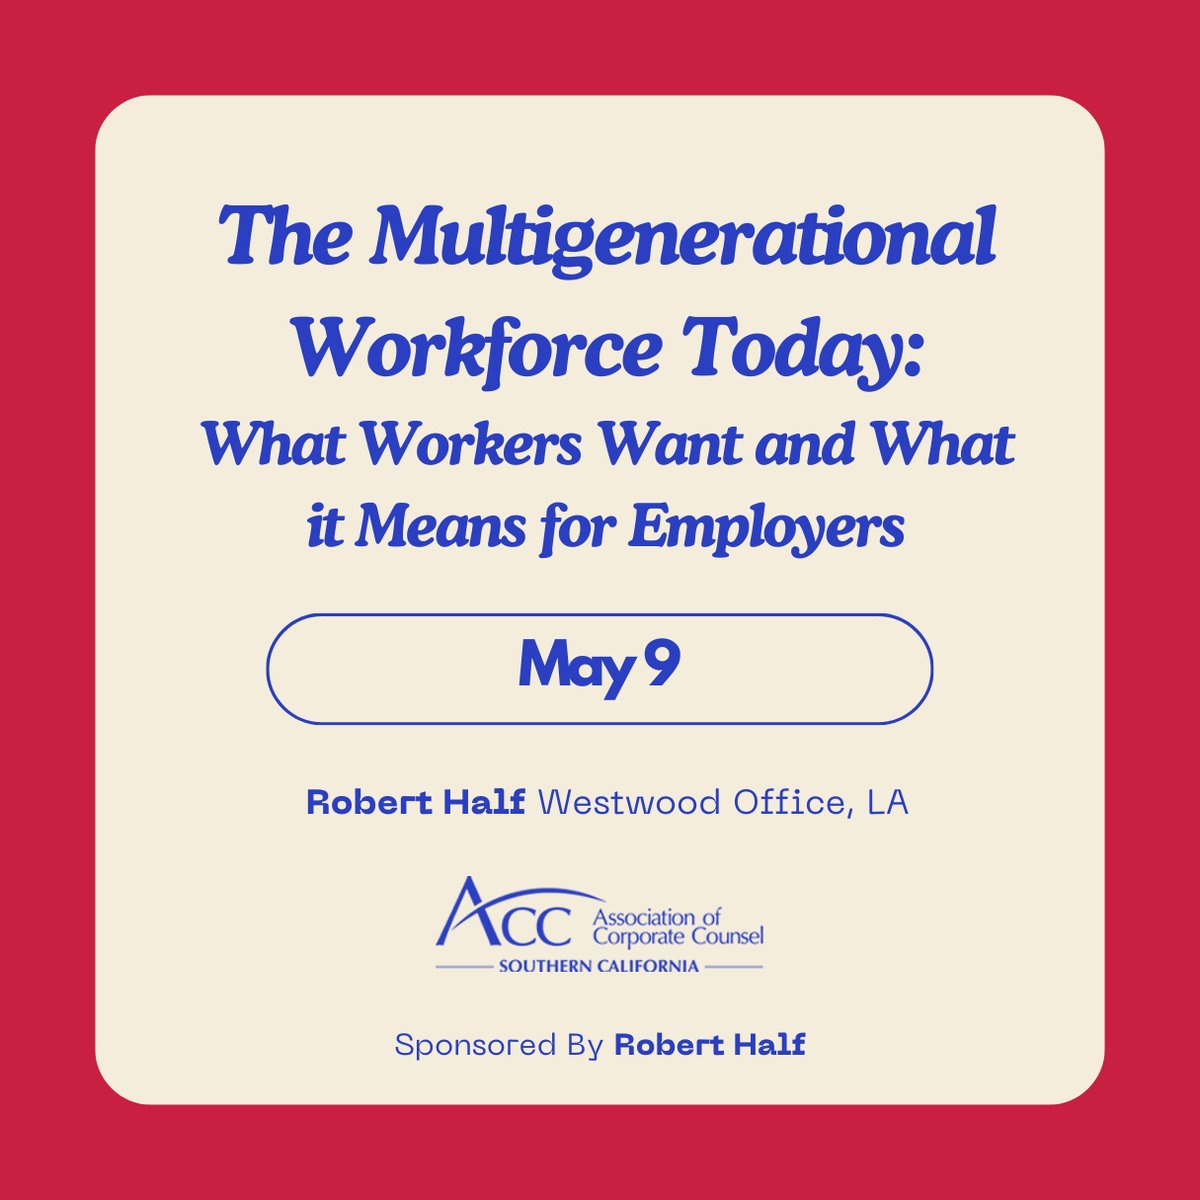 The Multigenerational Workforce Today: What Workers Want and What it Means for Employers

acc.com/education-even…

#acc #accfamily #accsouthernca #accsocalevents #inhousecounsel #corporatecounsel